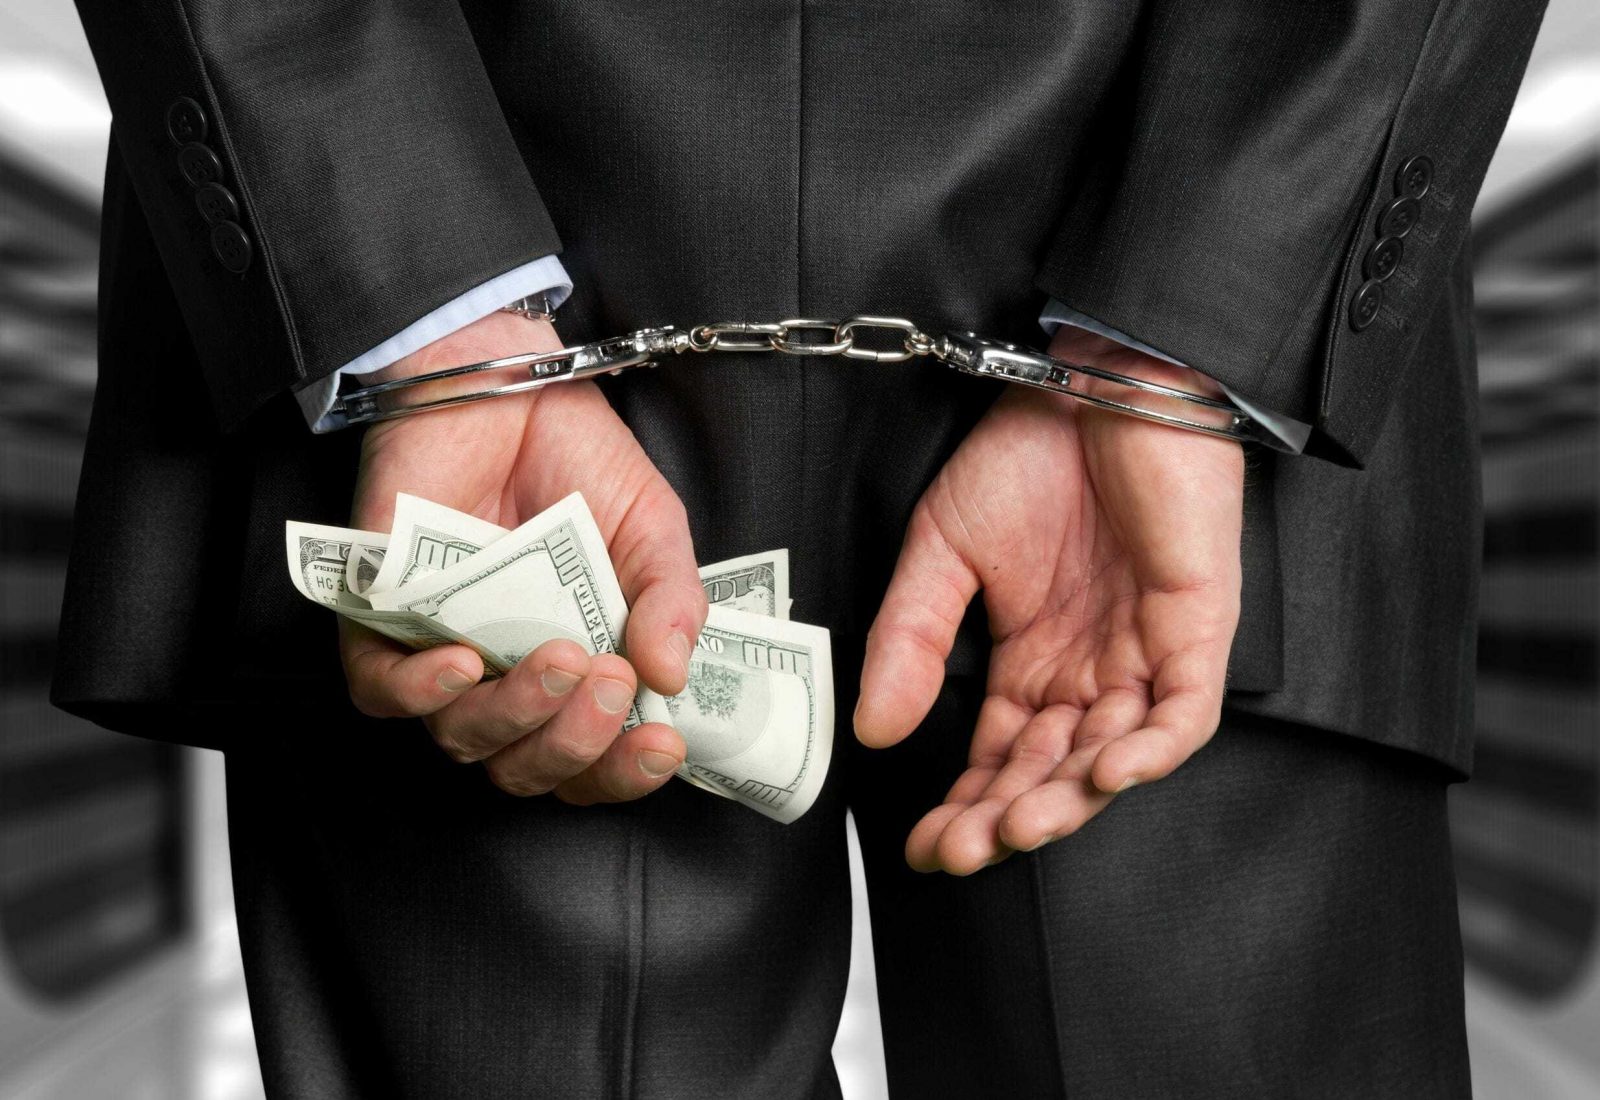 Church Accountant Receives 4-Year Prison Sentence for Tax Evasion and Wire Fraud Crimes